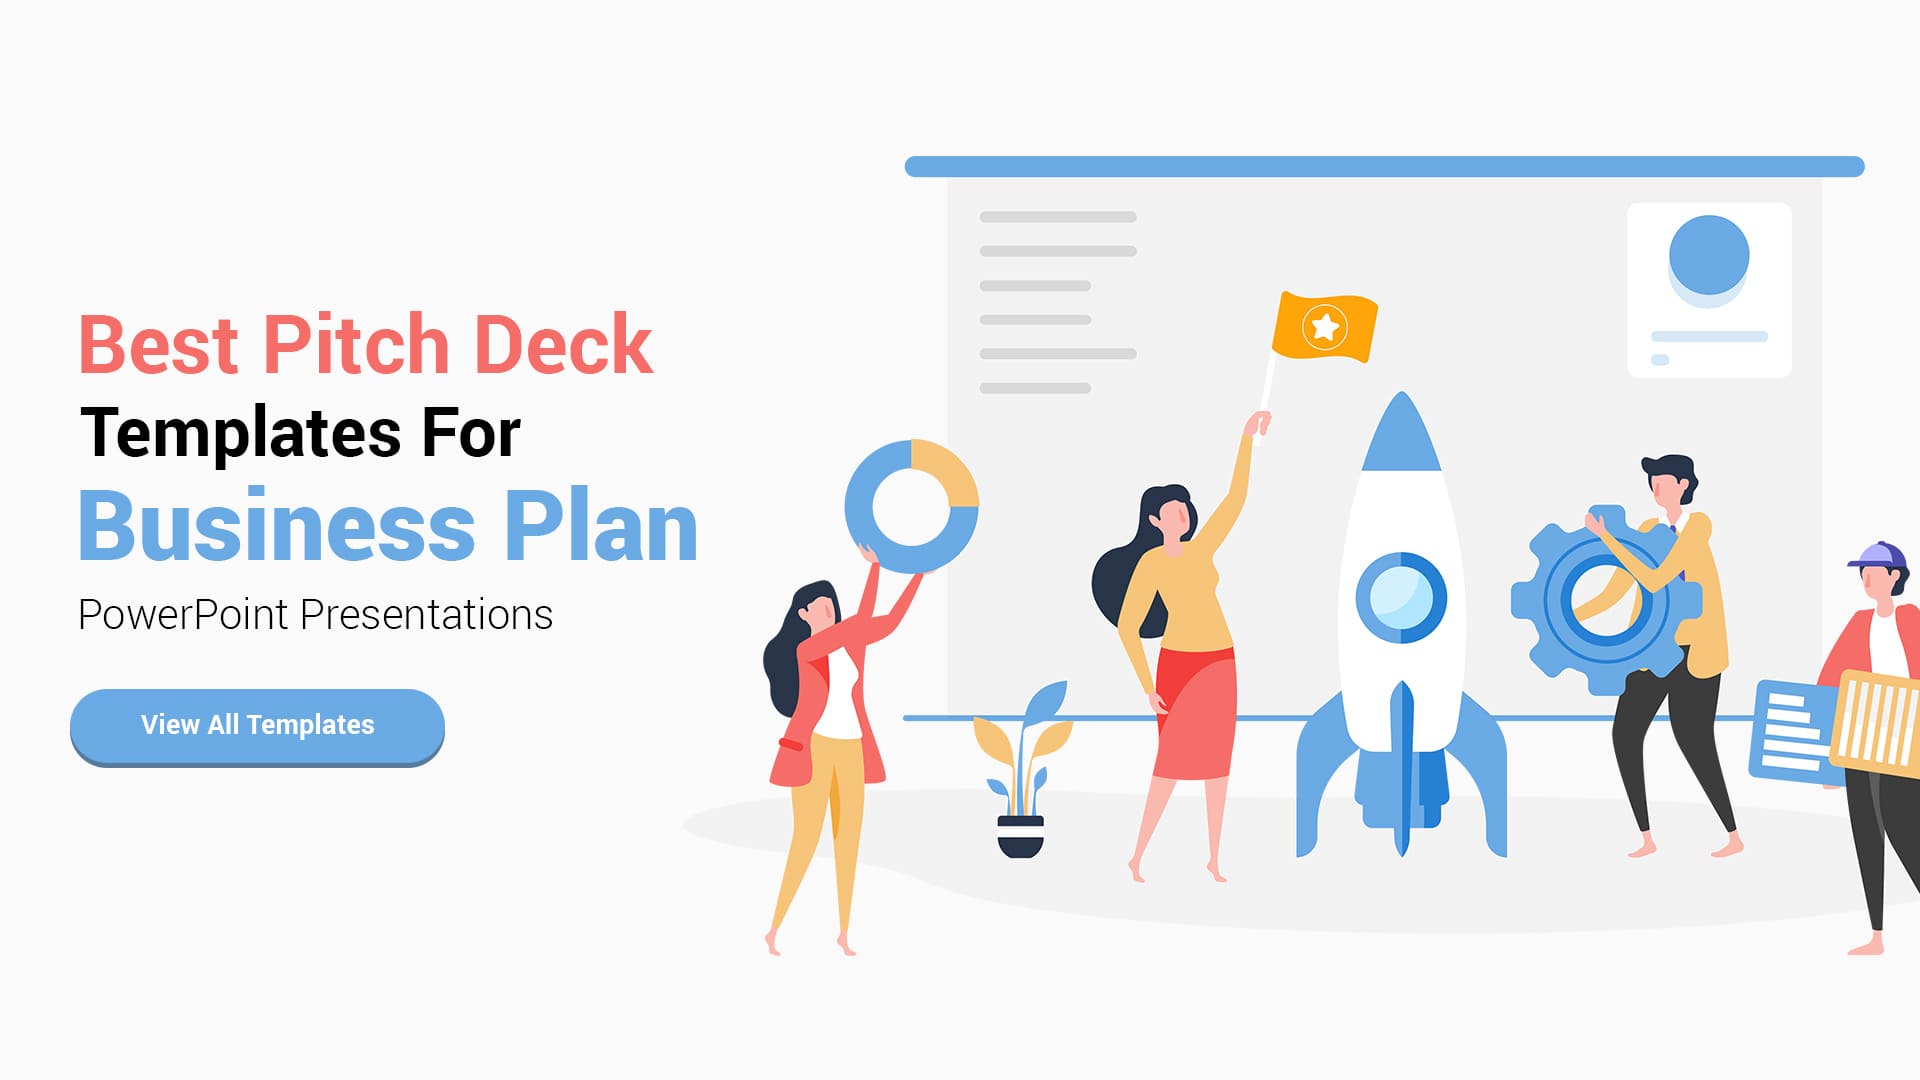 Best Pitch Deck Templates For Business Plan PowerPoint Presentations